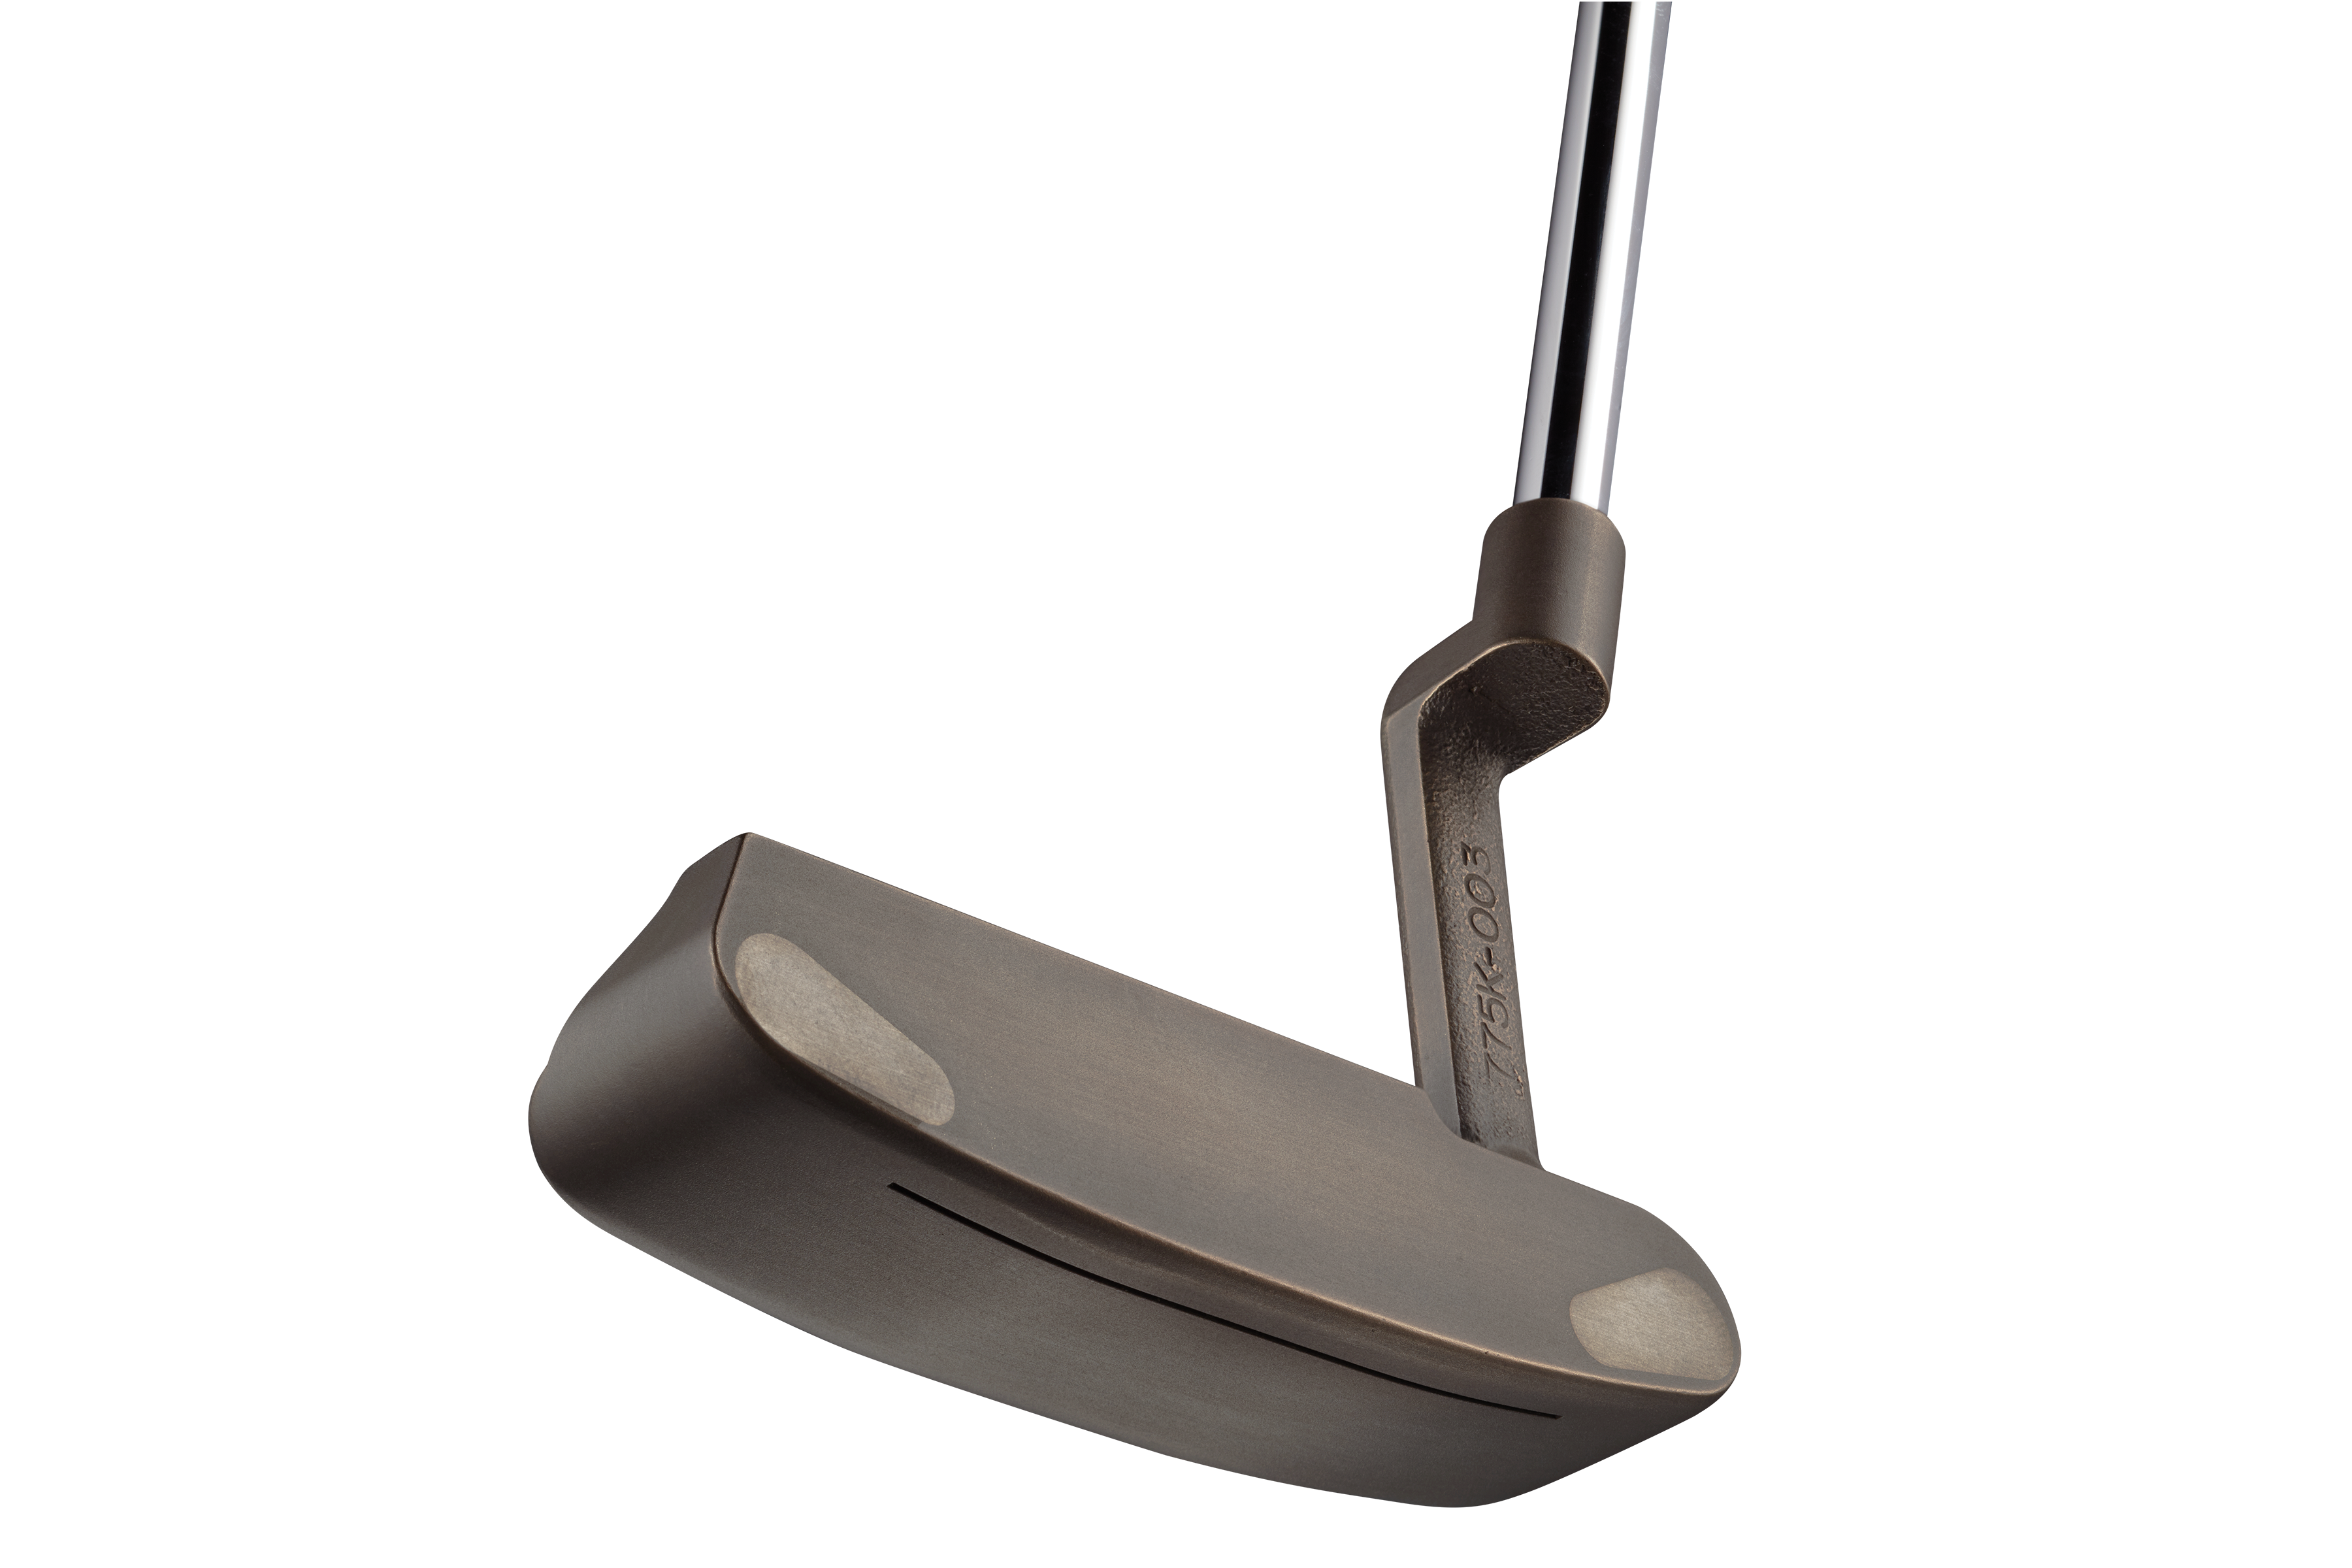 PING release limited-edition 50th anniversary Anser putter